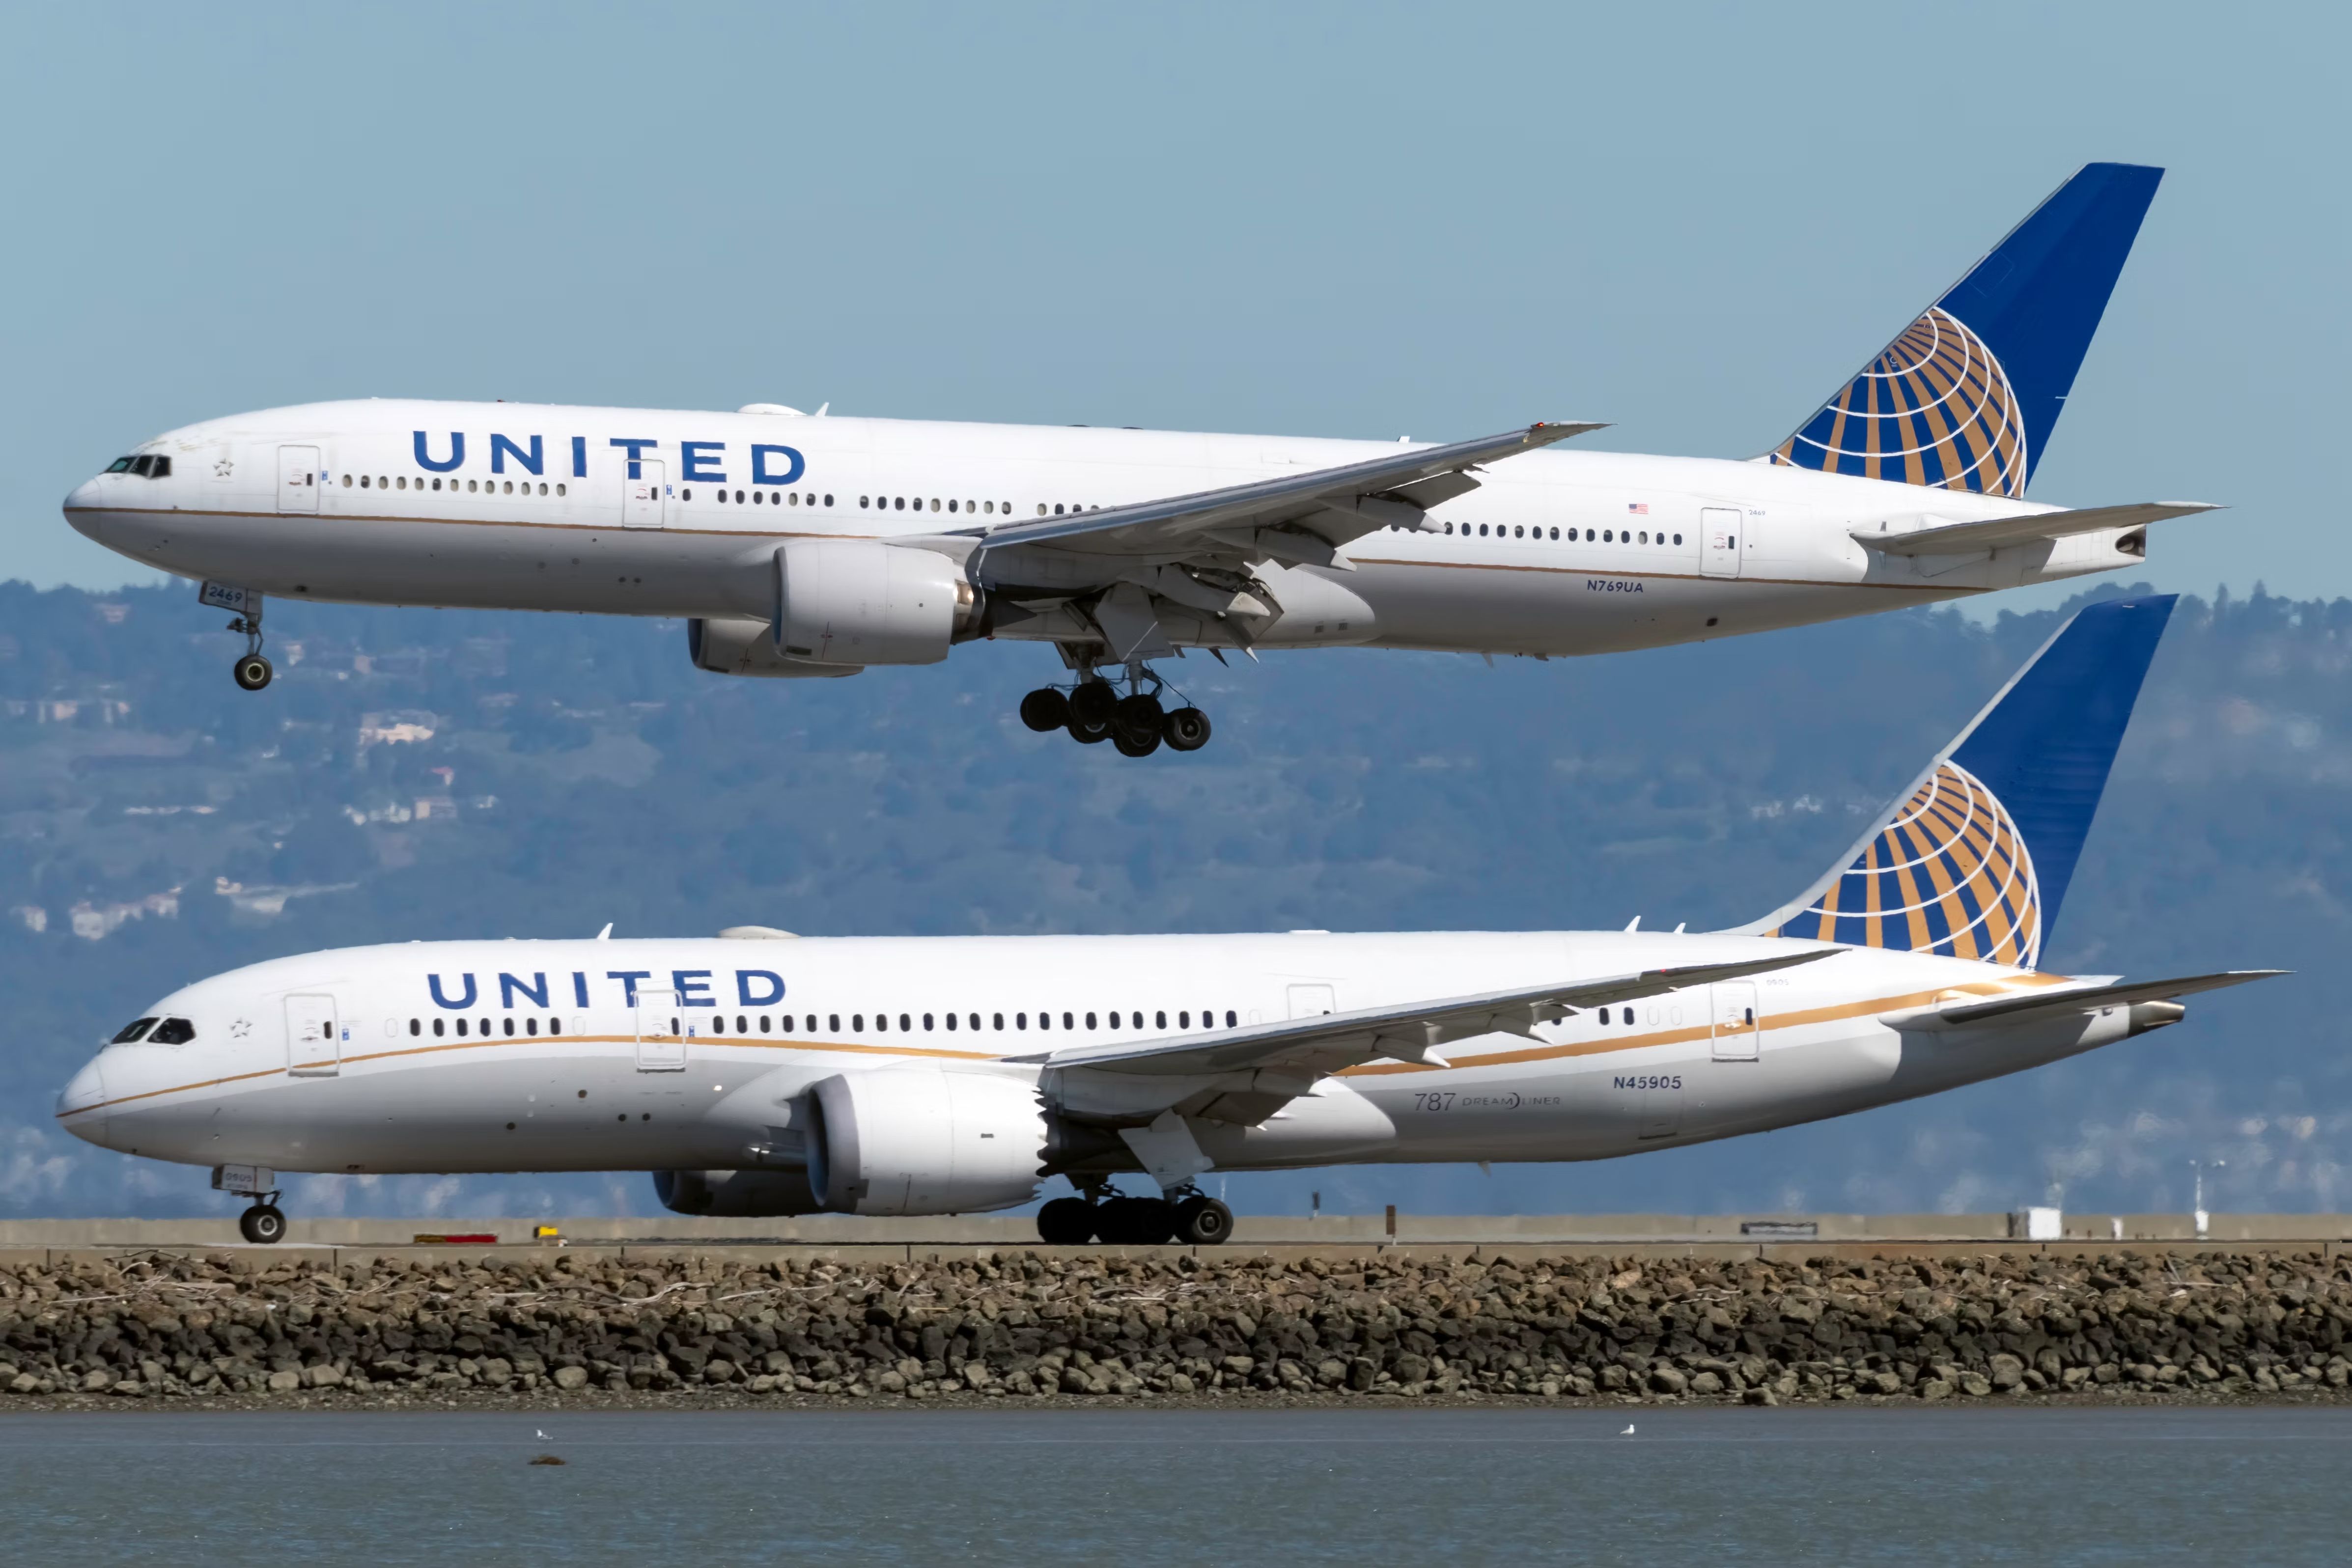 A United Airlines 777 about to land as the 787 waits to use the runway.